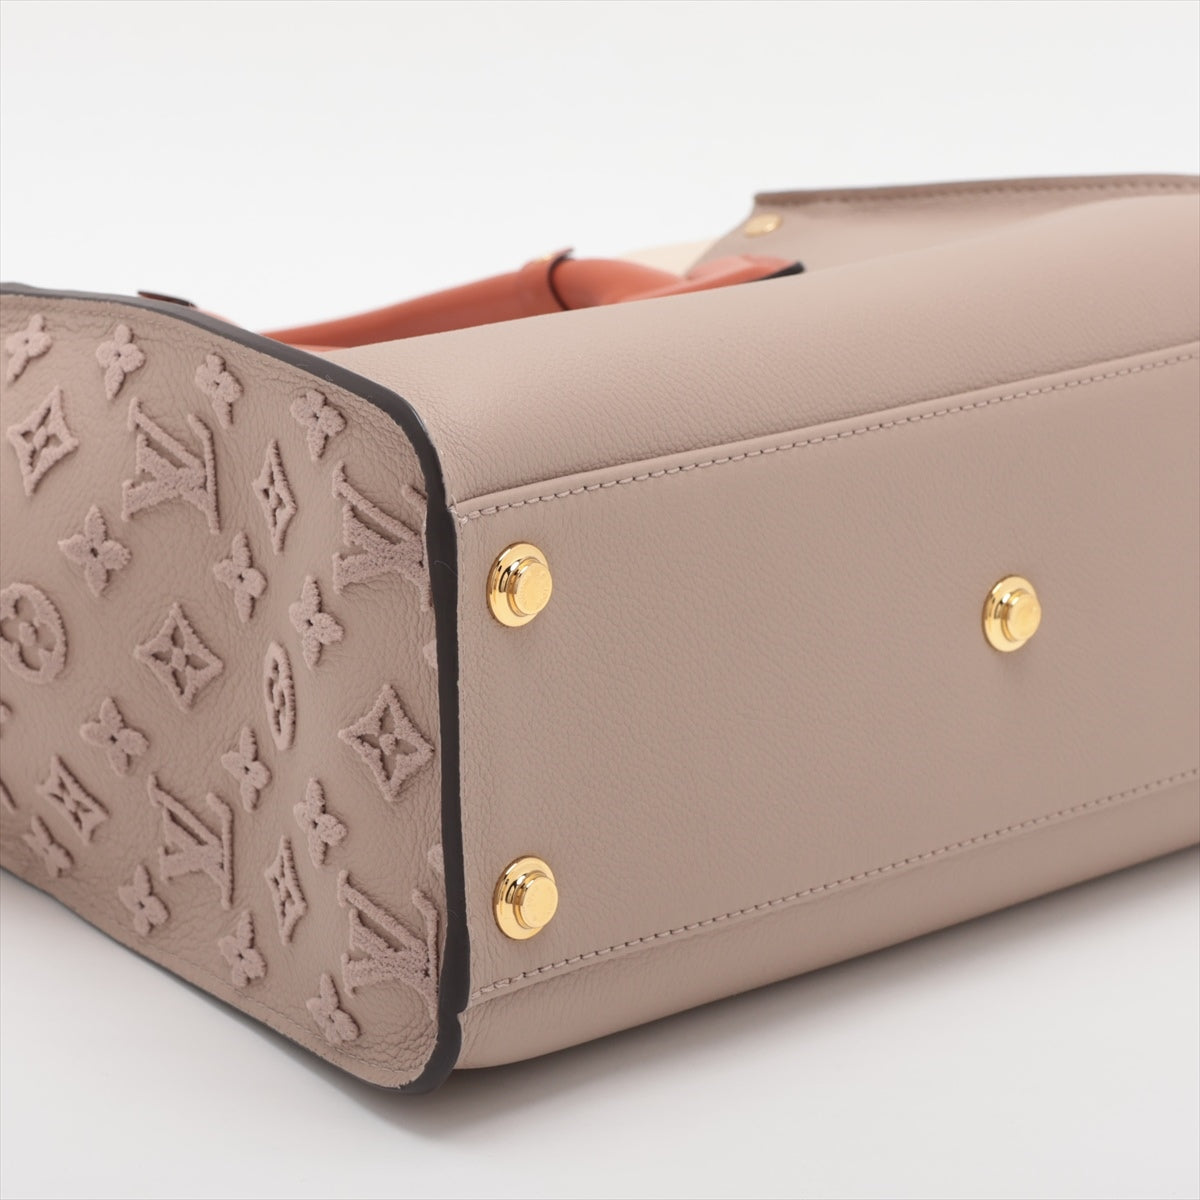 Louis Vuitton Monogram Tuffetage On My Side MM M53825 There was an RFID response